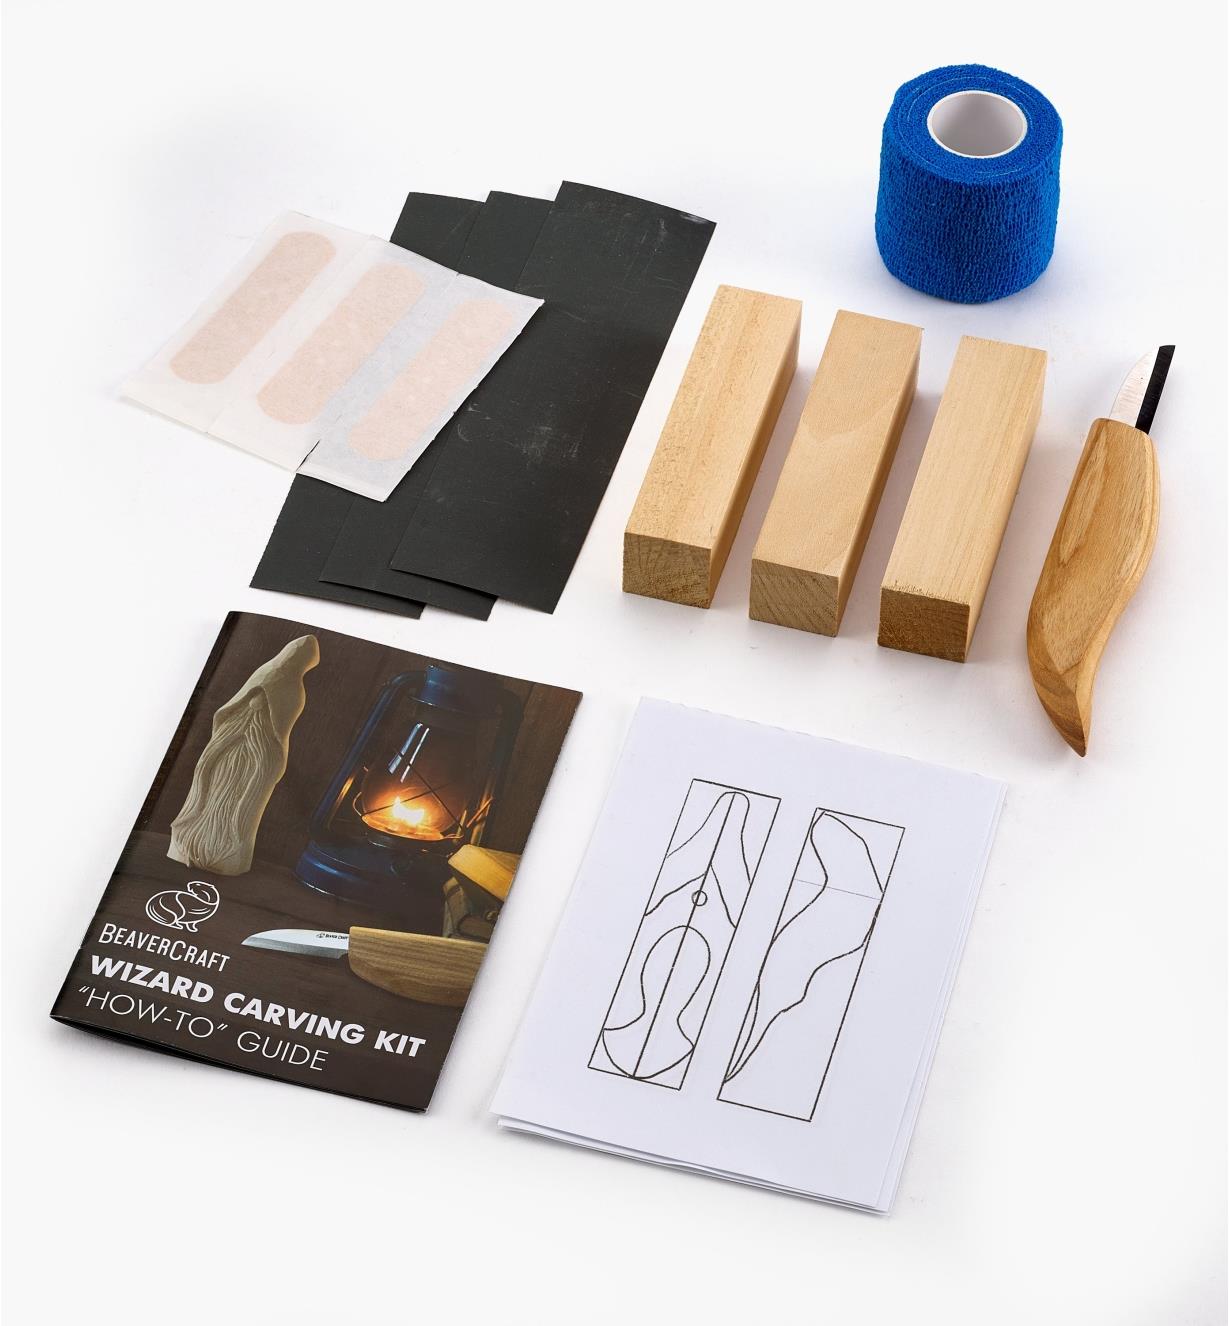 10S1081 - Wizard Carving Kit